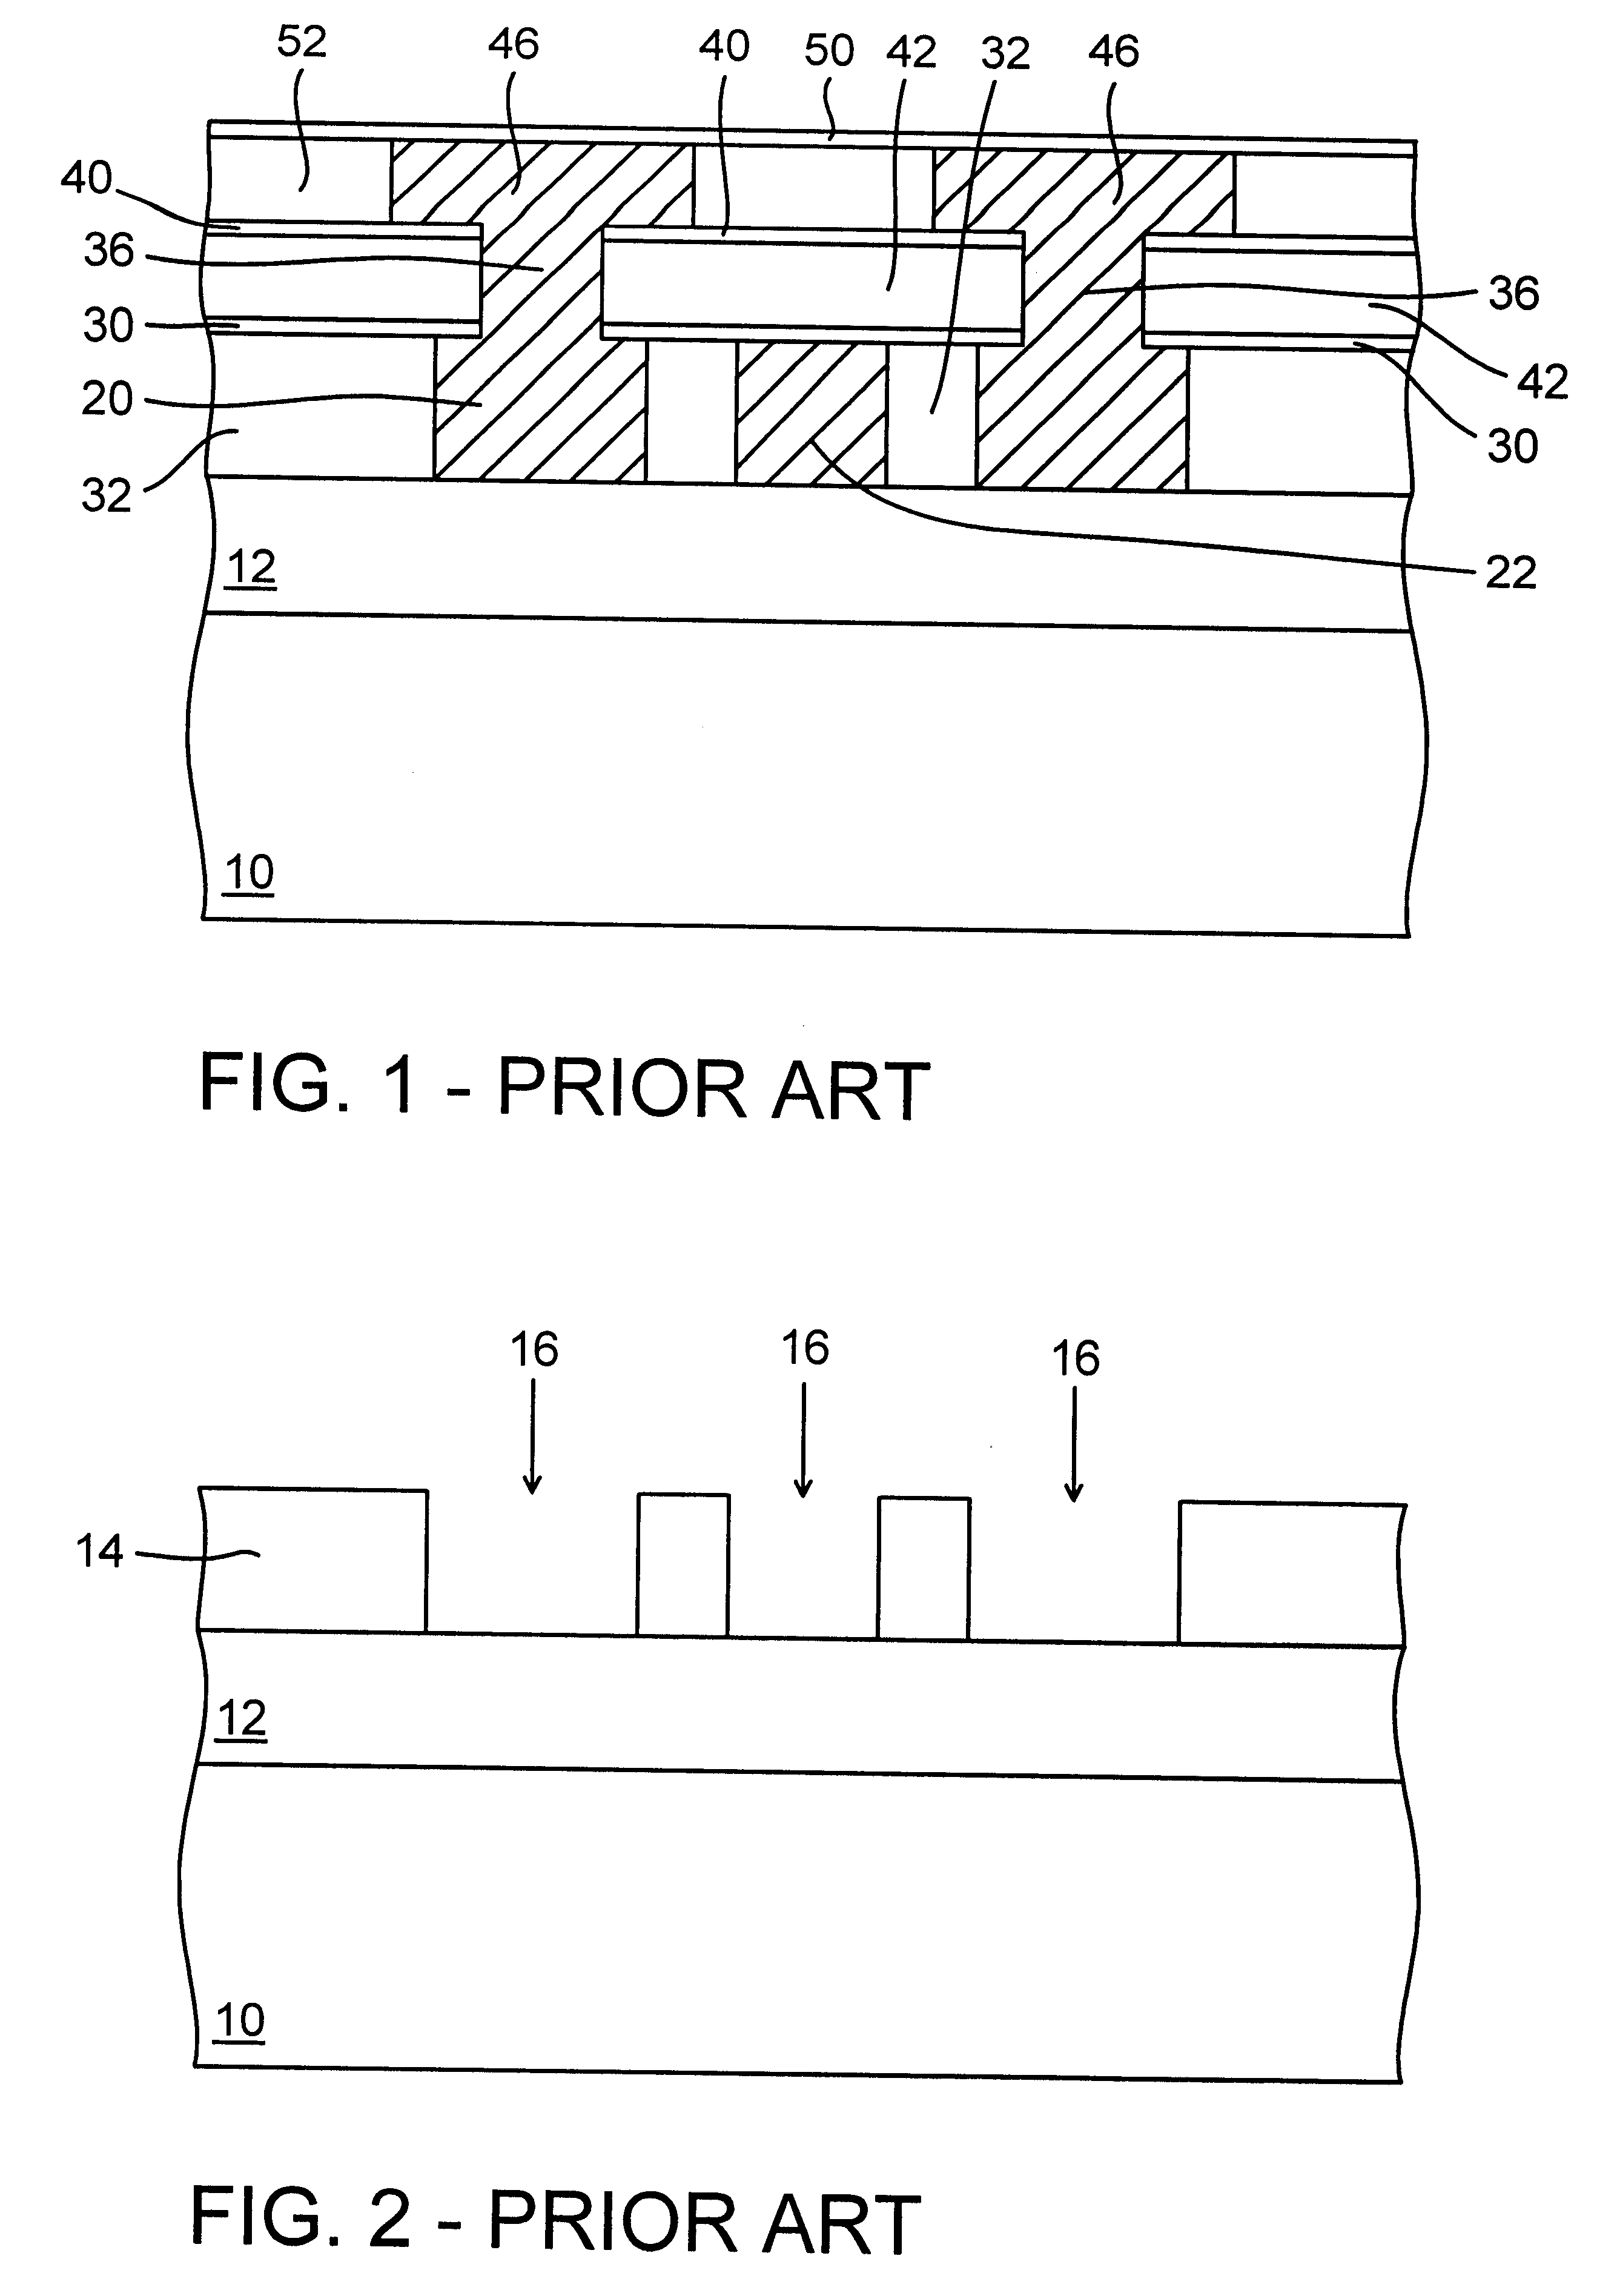 Interconnect structure with gas dielectric compatible with unlanded vias